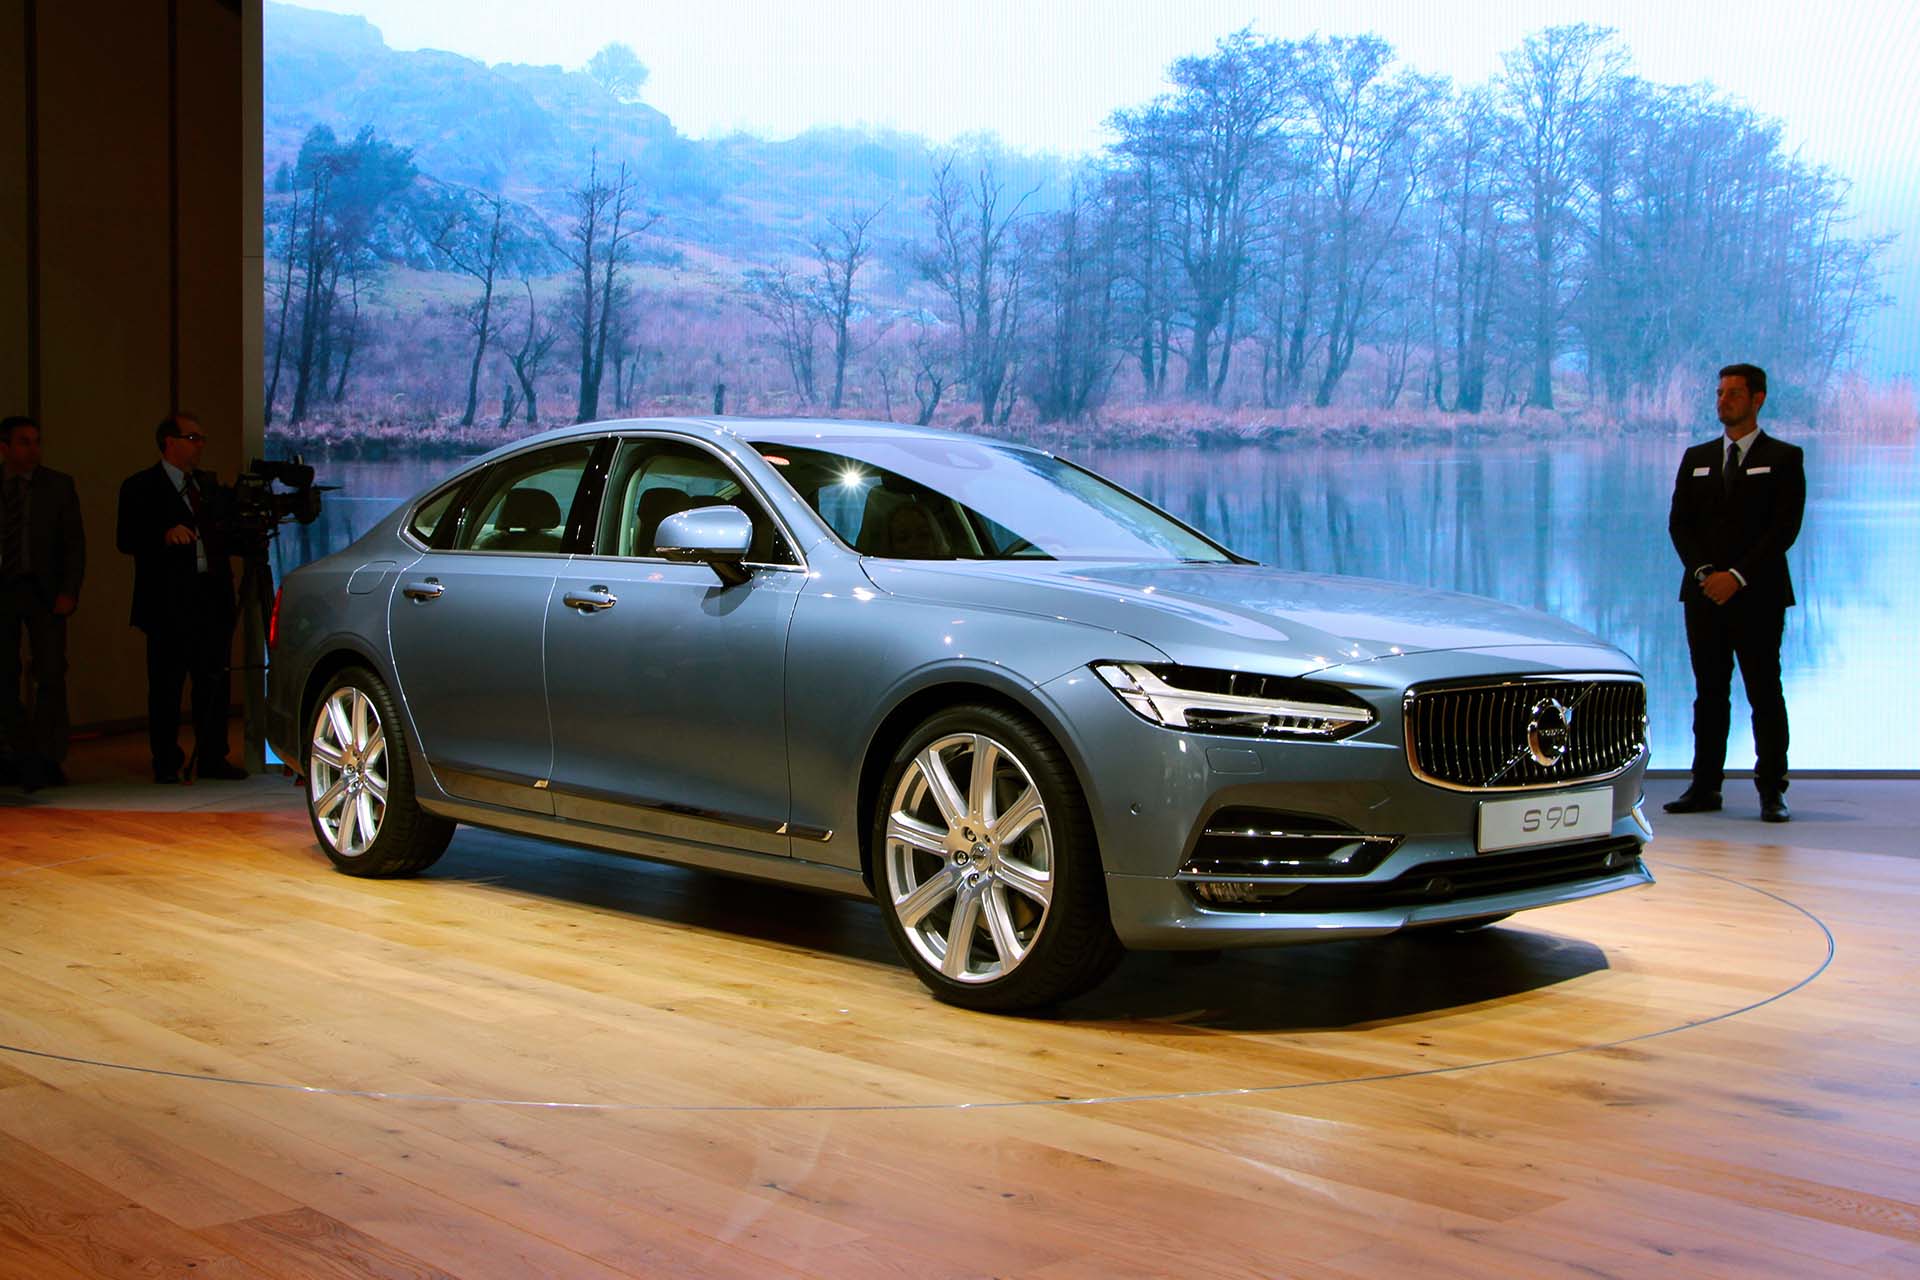 Volvo showed off the S90, with its signature Mjolnir headlights. It's a handsome look that works to convey an air of quiet confidence – the T8 hybrid manages 410 hp, so plenty of confidence on tap.